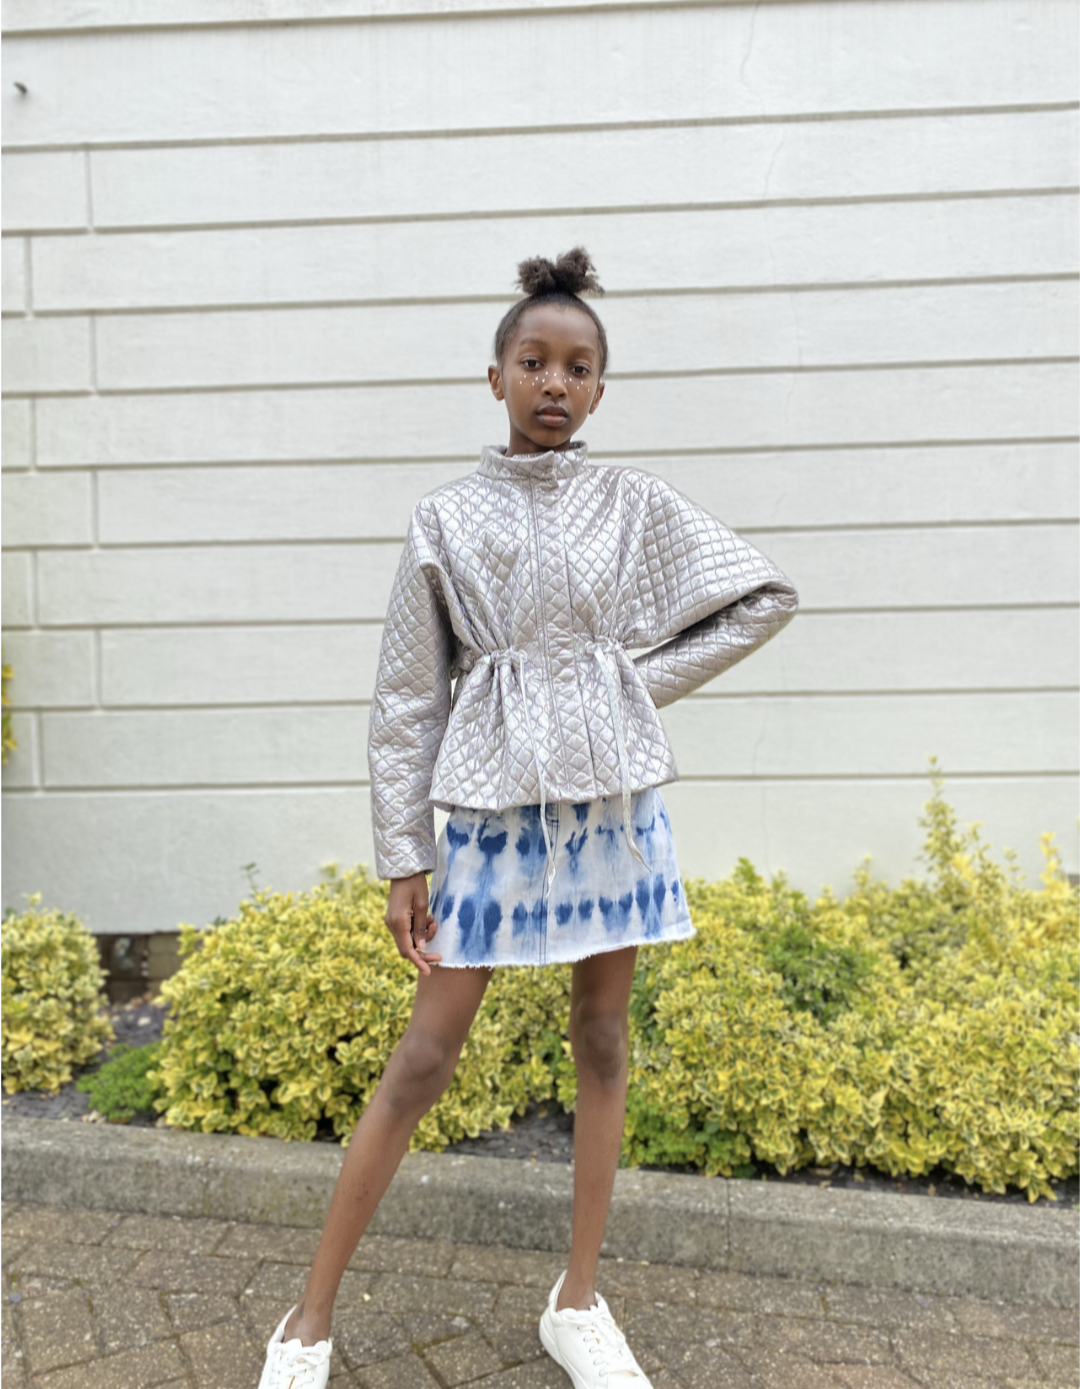 Maya Glitters poses outside in the Atari Jacket along with her shibori dyed skirt and white shoes